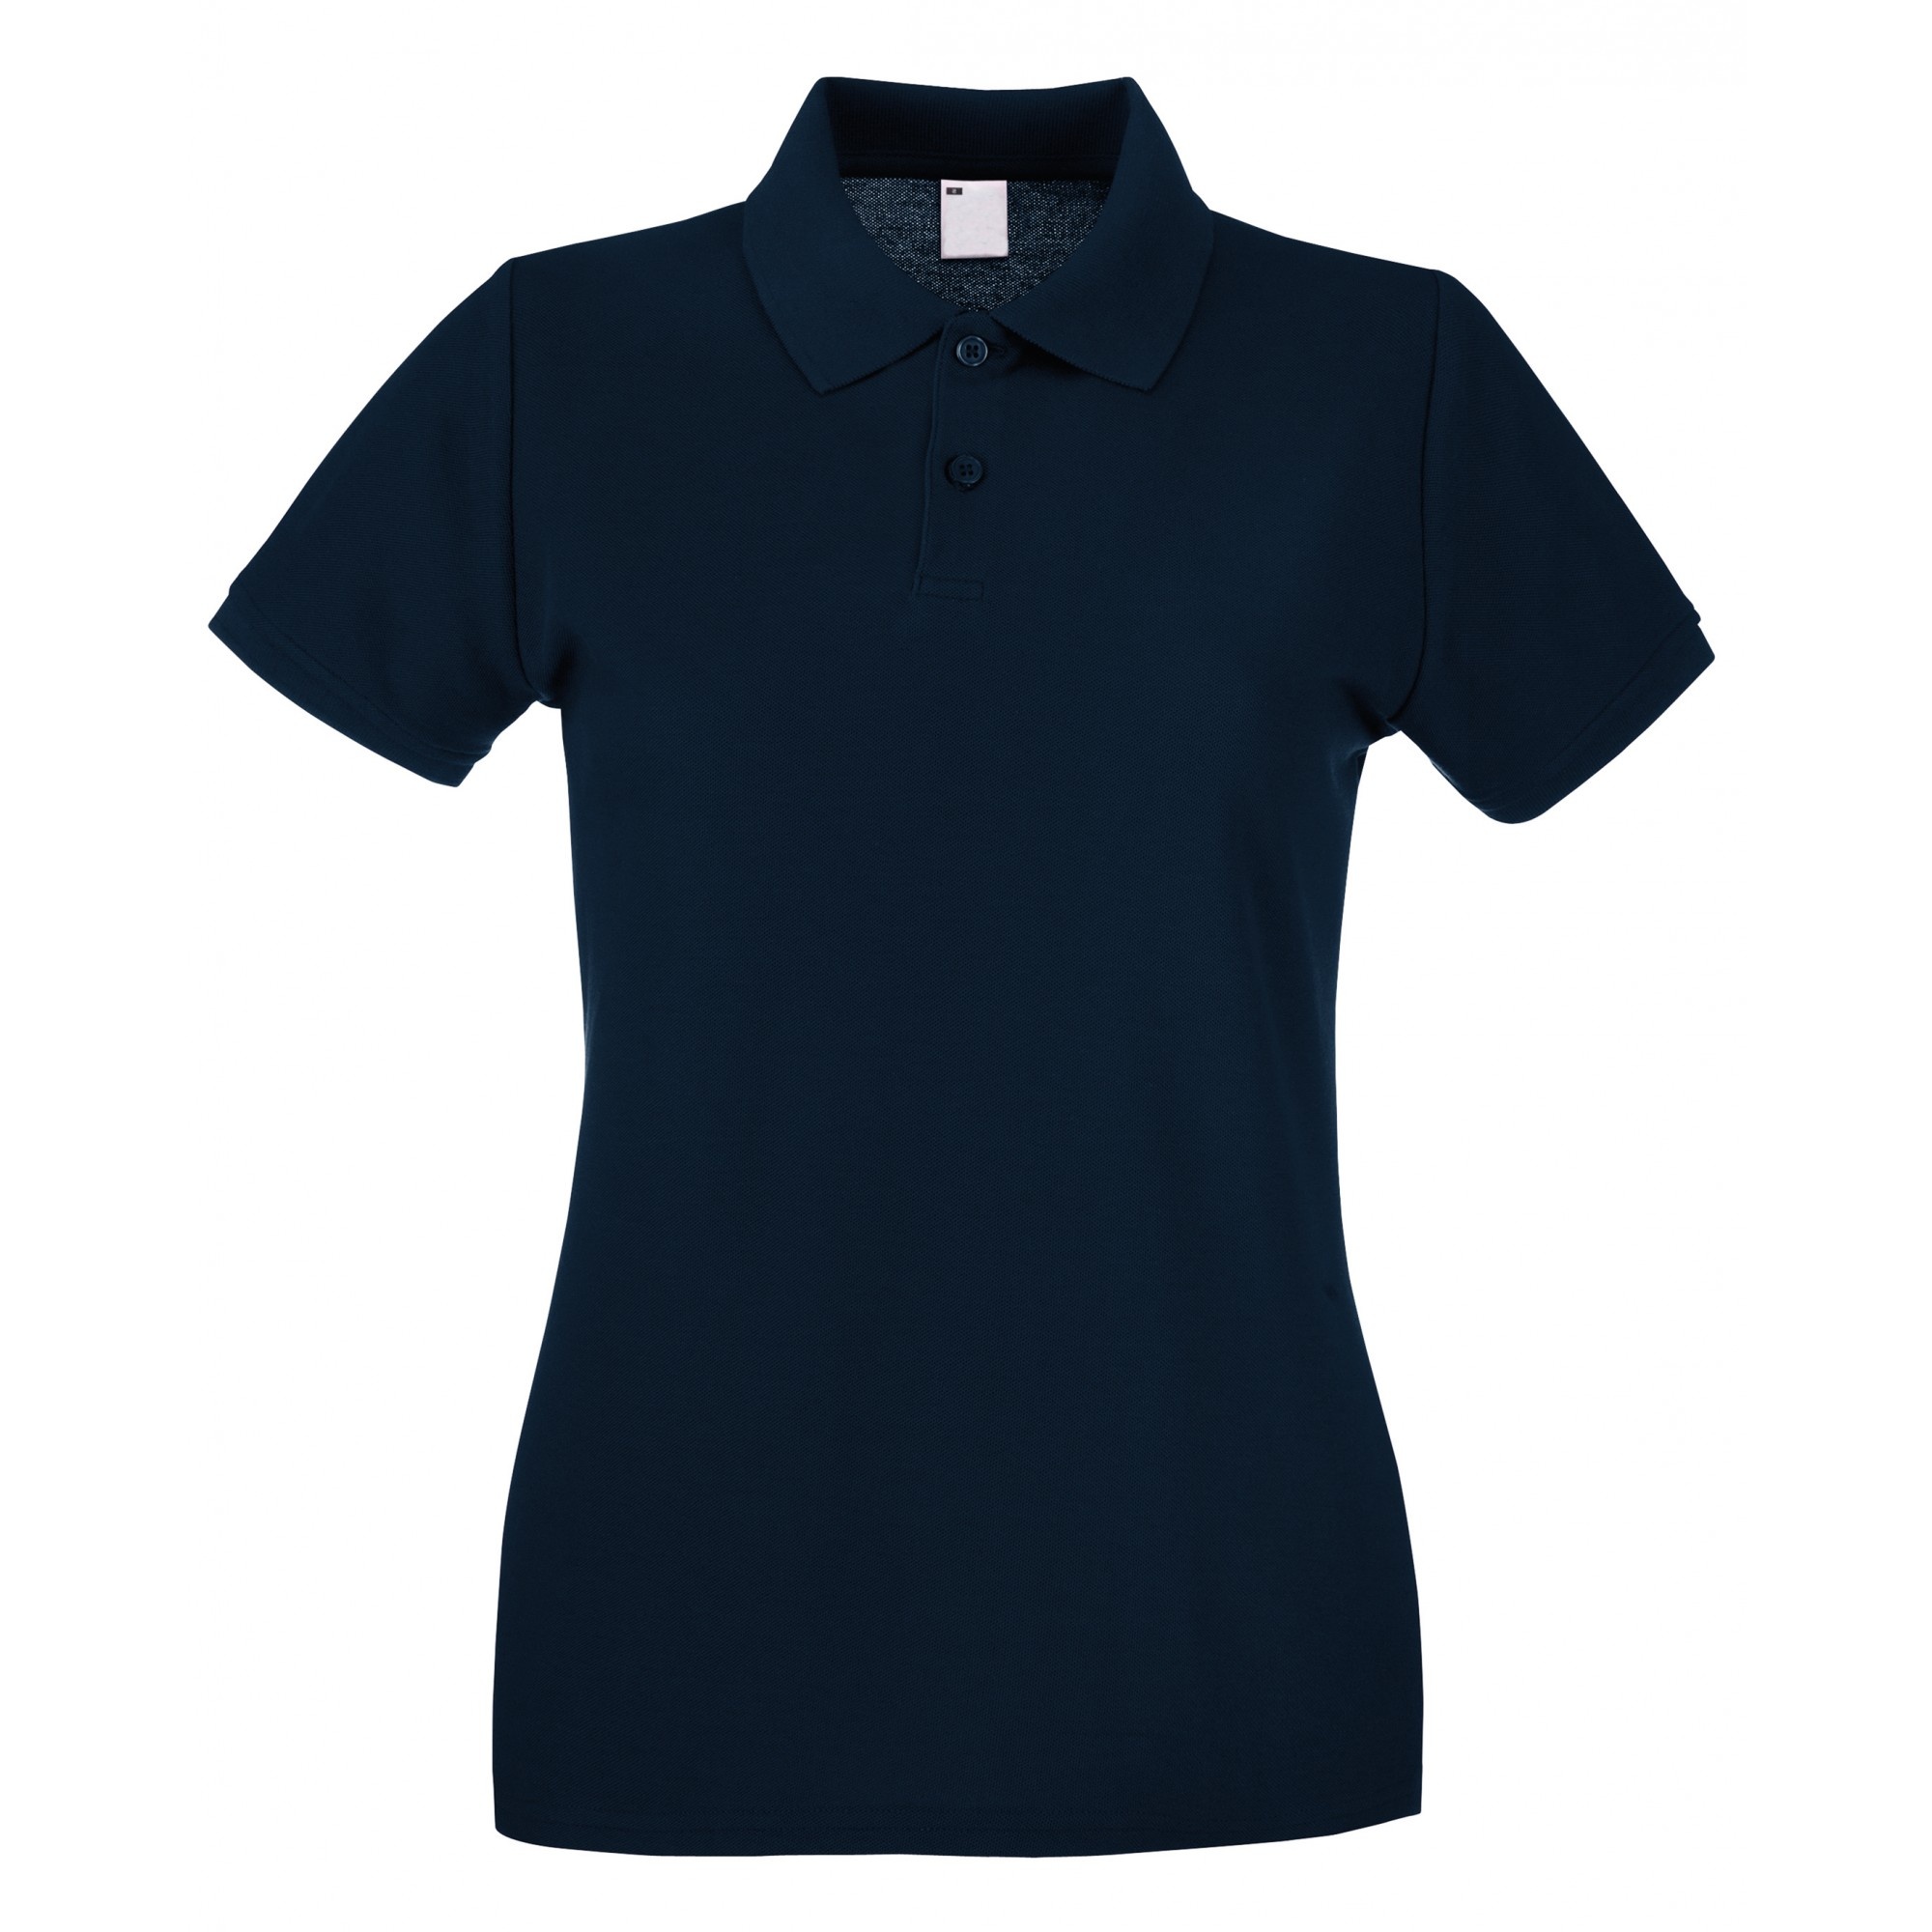 /ladies Fitted Short Sleeve Casual Polo Shirt Universal Textiles - azul-marino - 